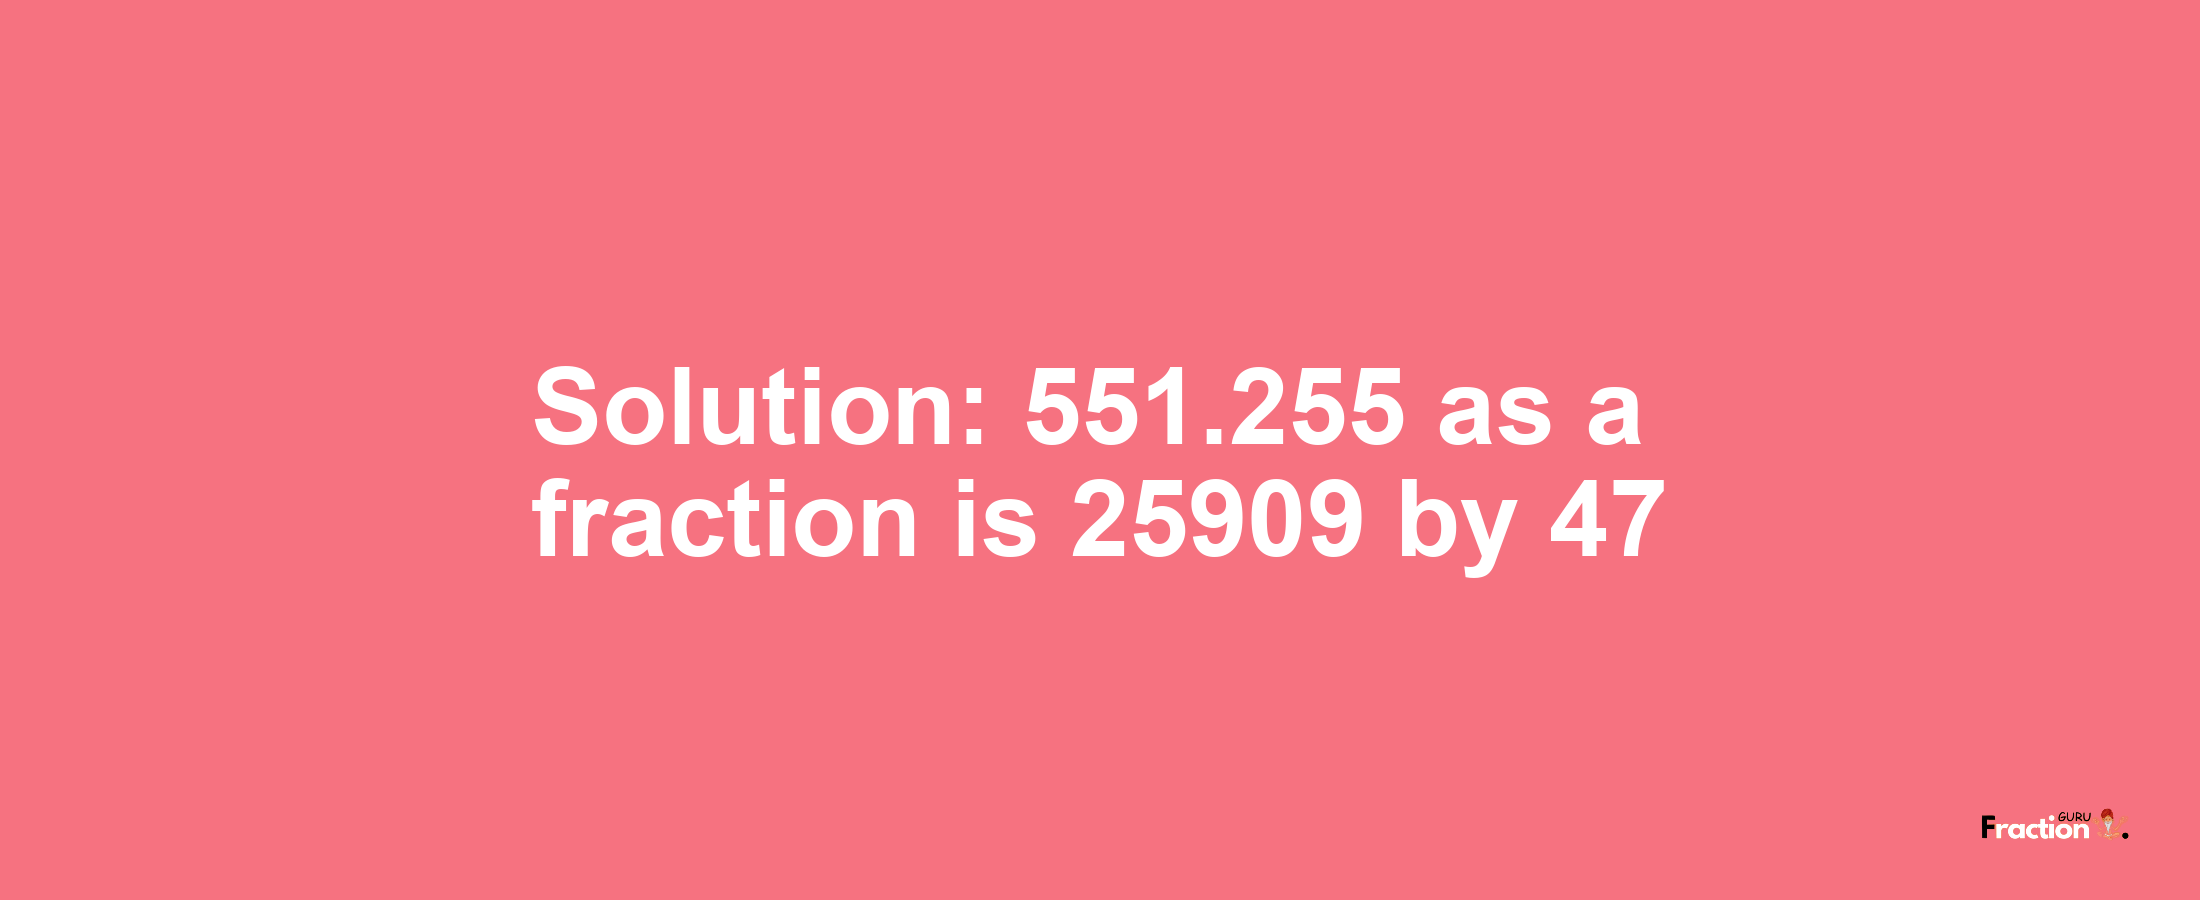 Solution:551.255 as a fraction is 25909/47